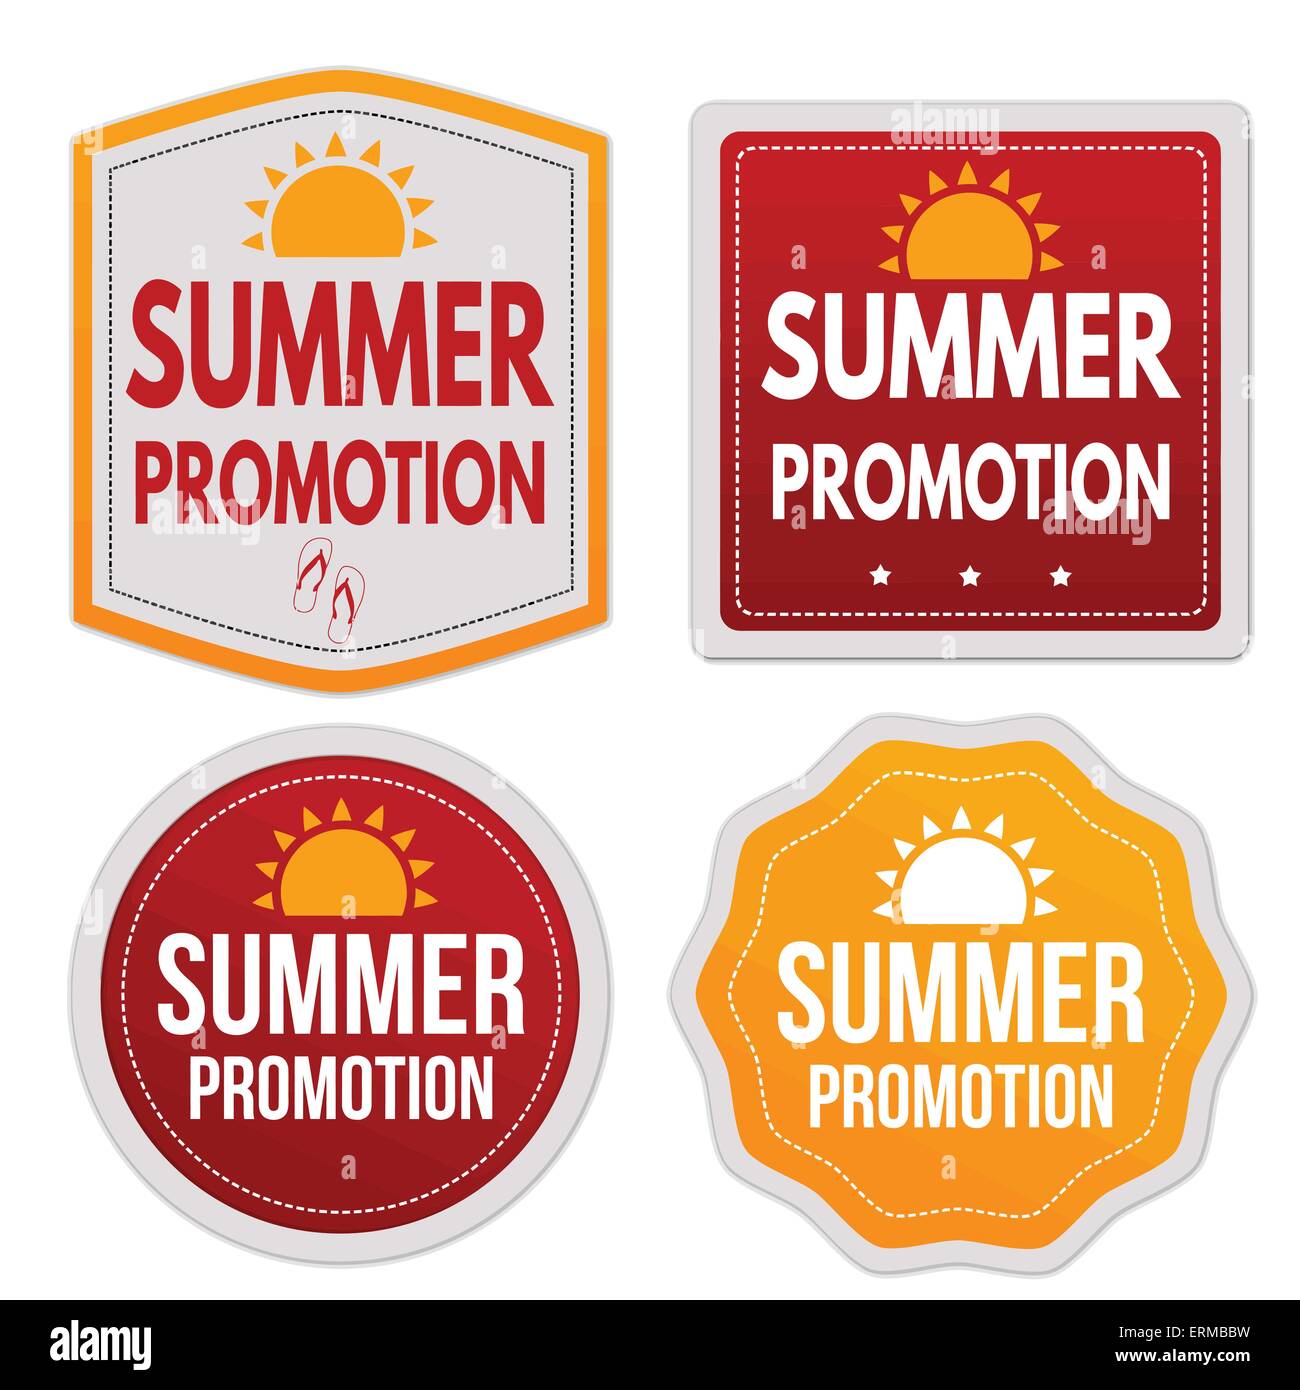 Summer promotion stickers set on white background, vector illustration Stock Vector